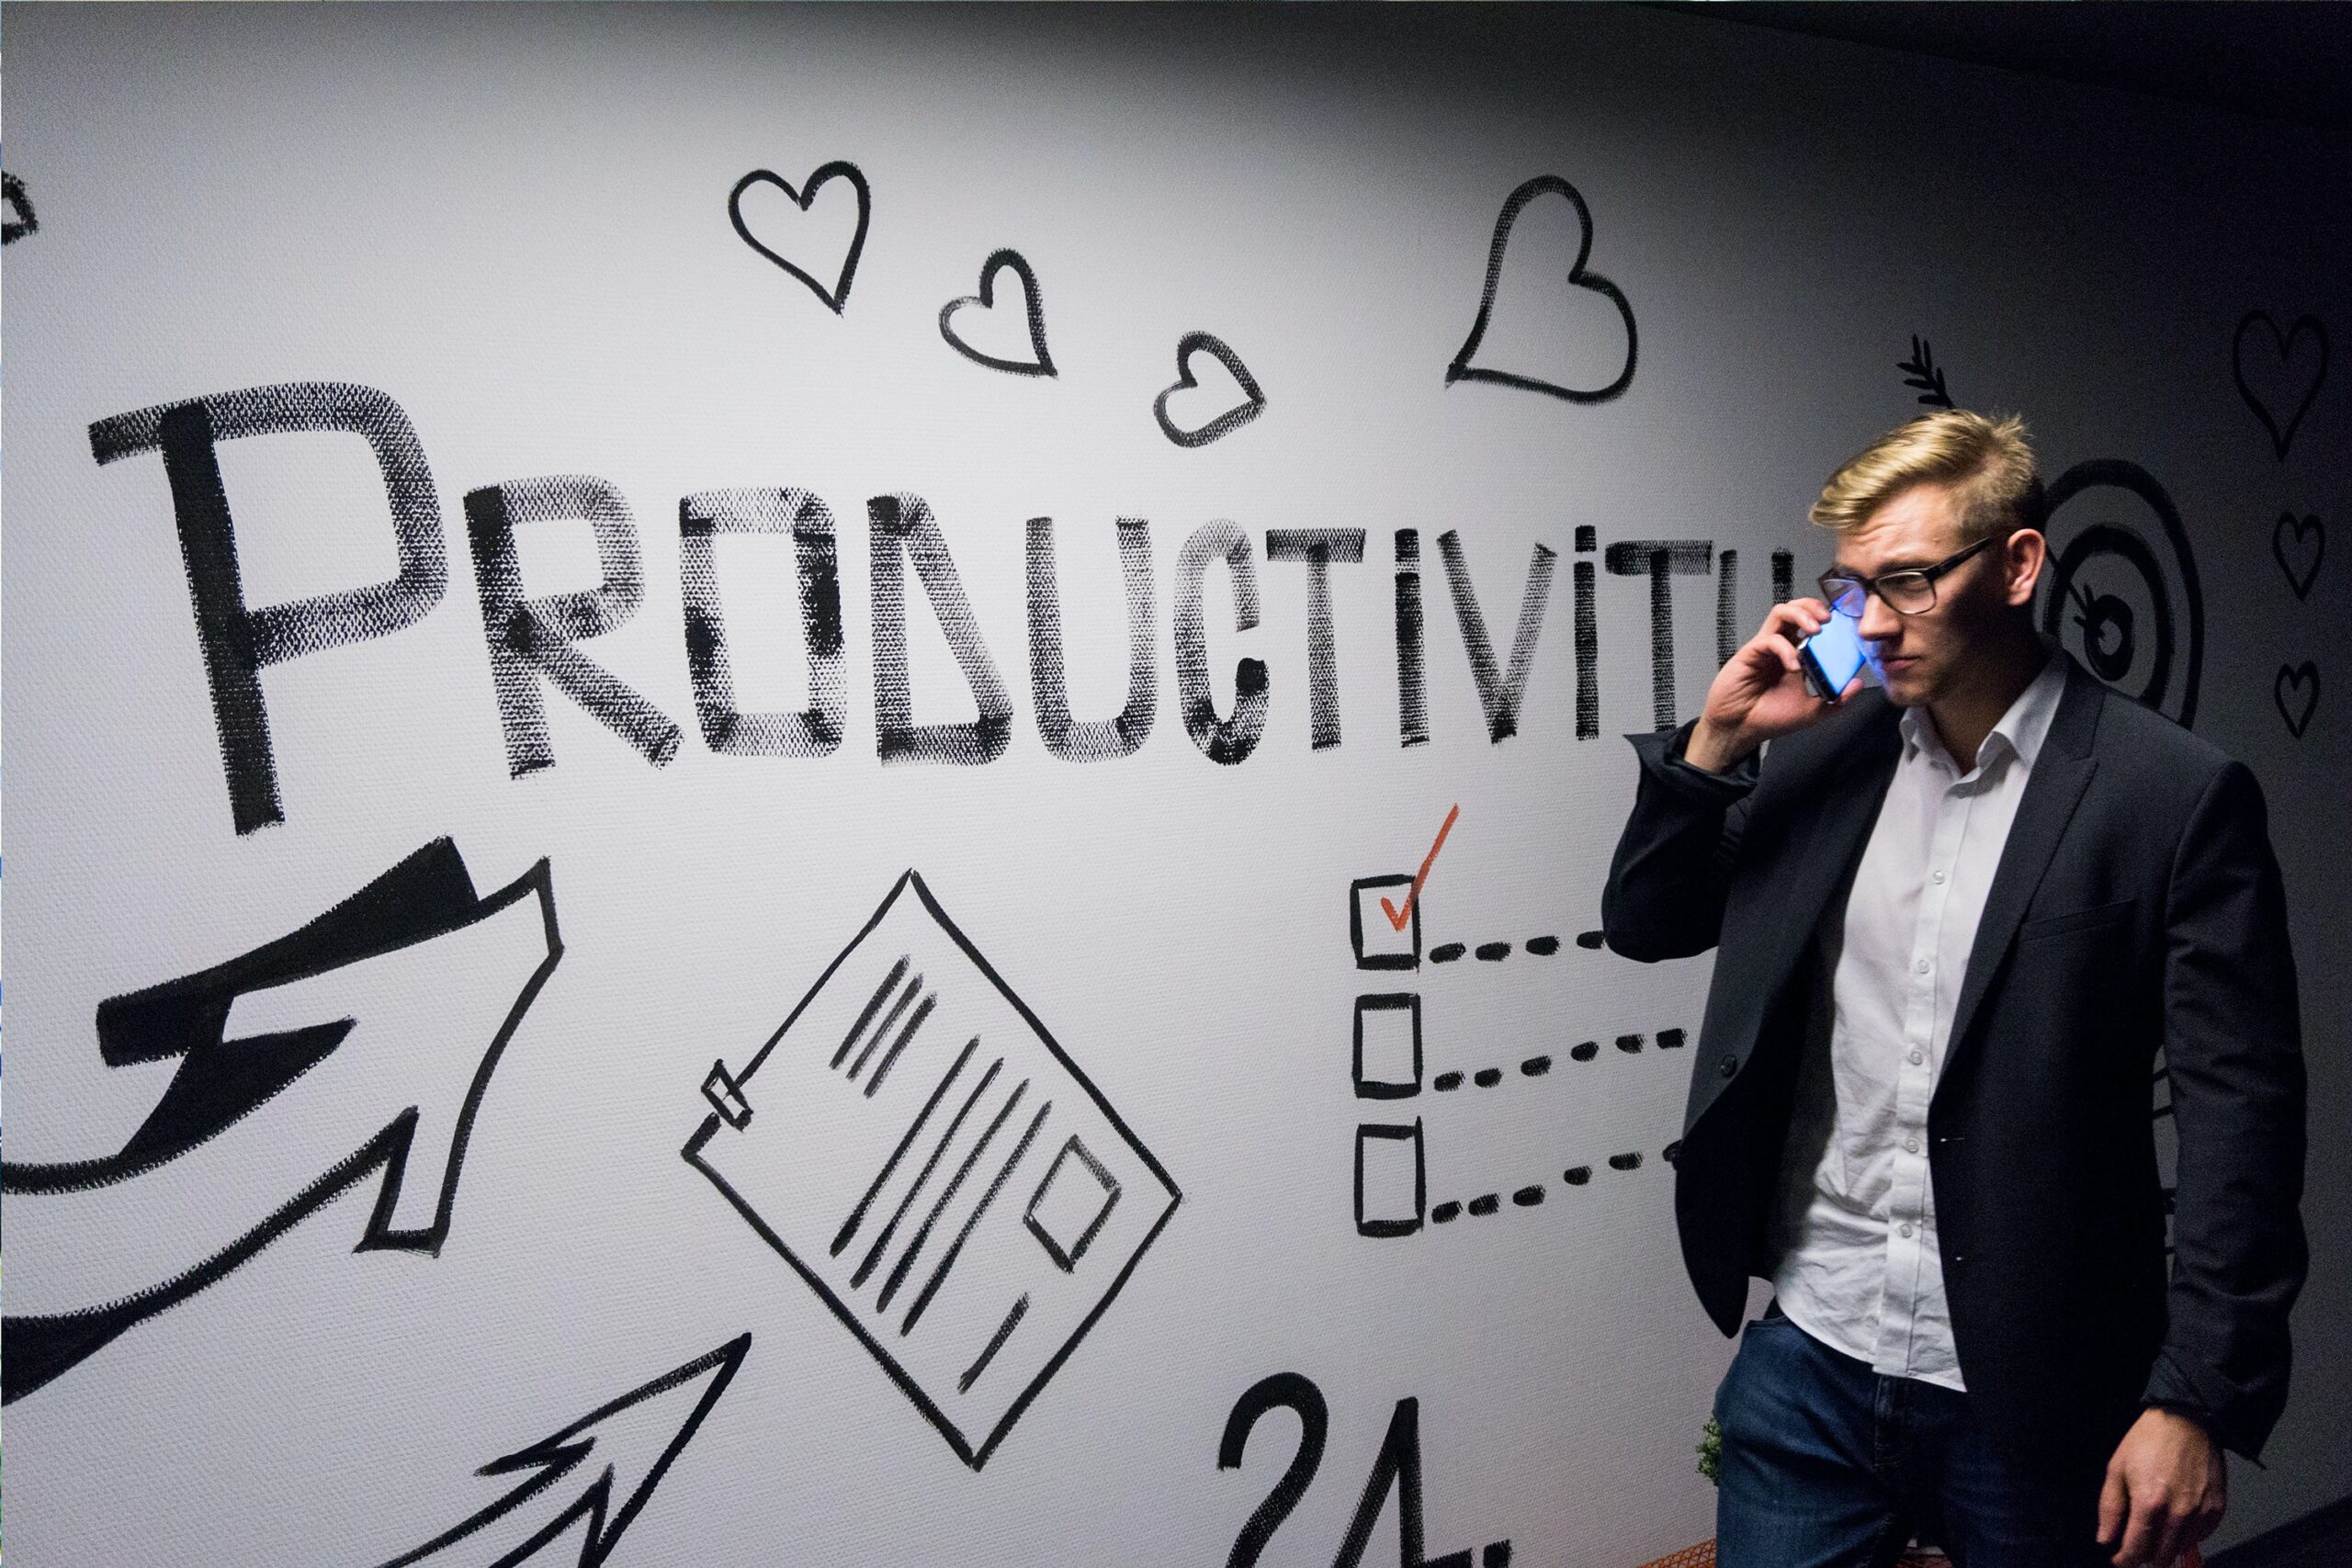 Manager-Speaking-On-Cell-Phone-In-front-of-Productivity-Whiteboard